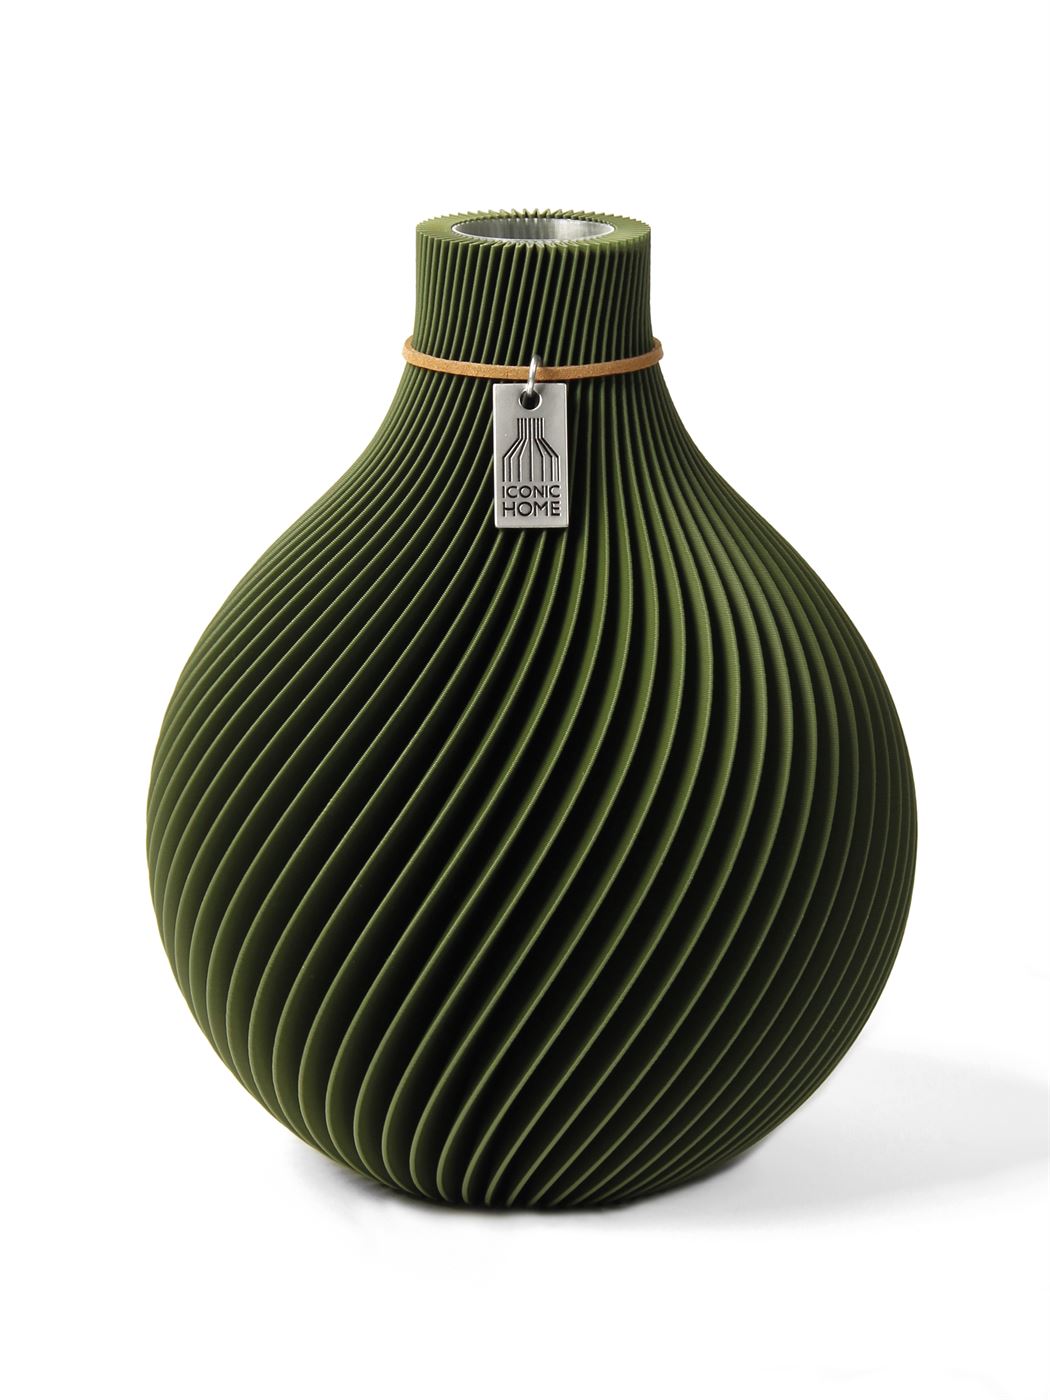 Vase Sphere Moss Green Small ICONIC HOME